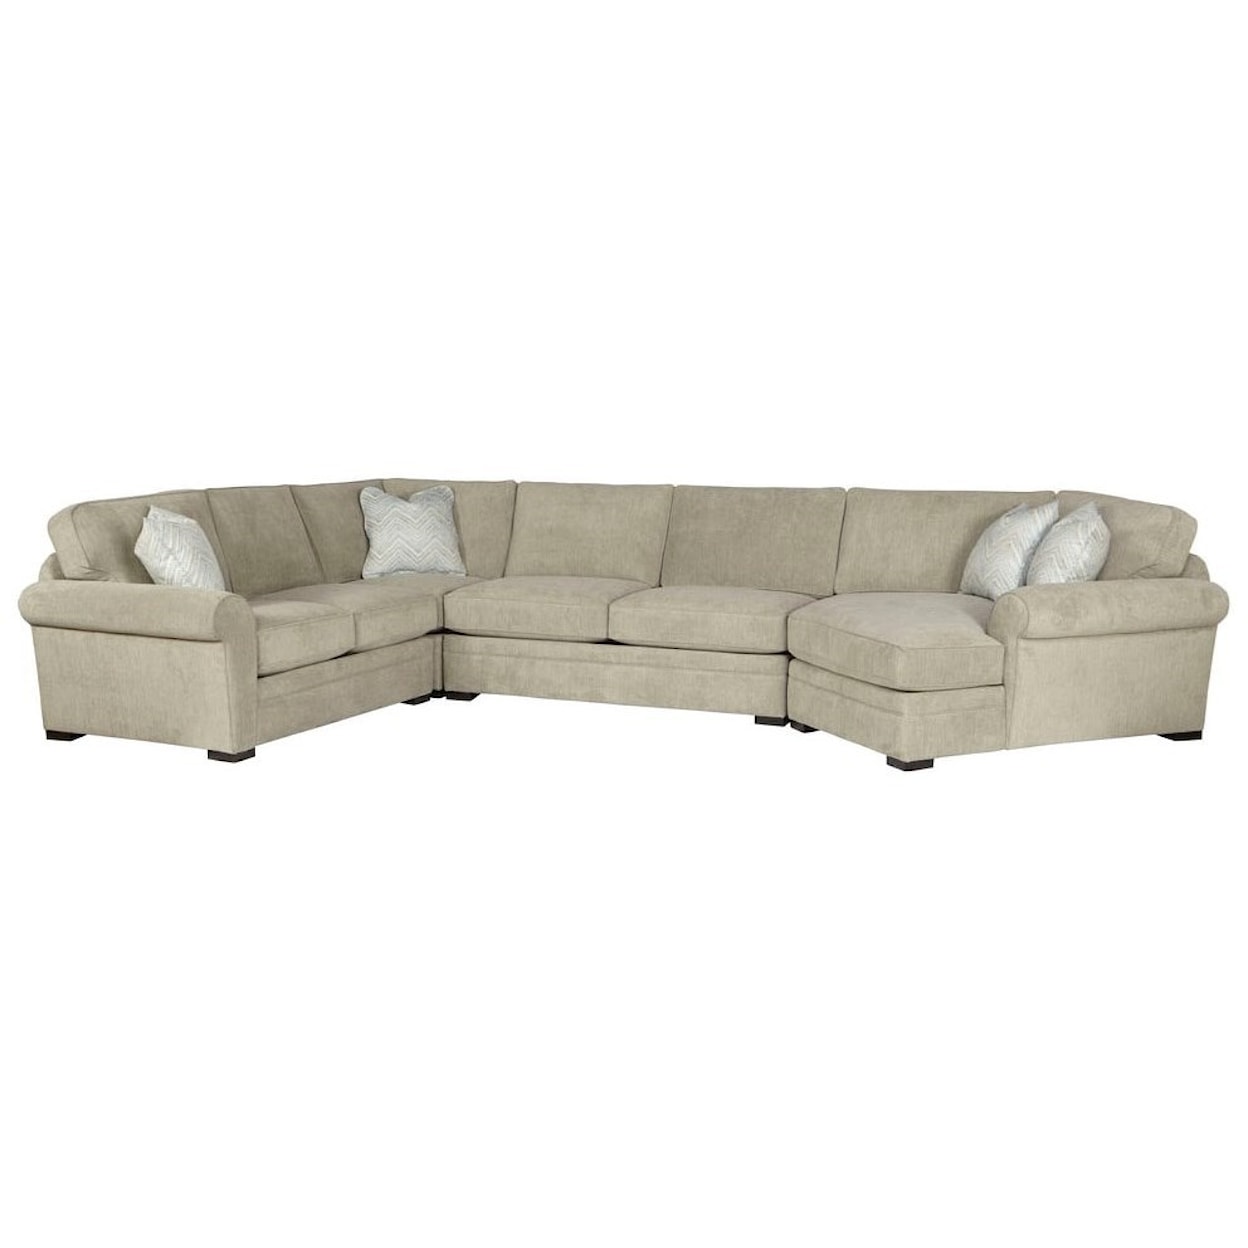 Jonathan Louis Choices - Orion 4-Piece Cuddler Sectional